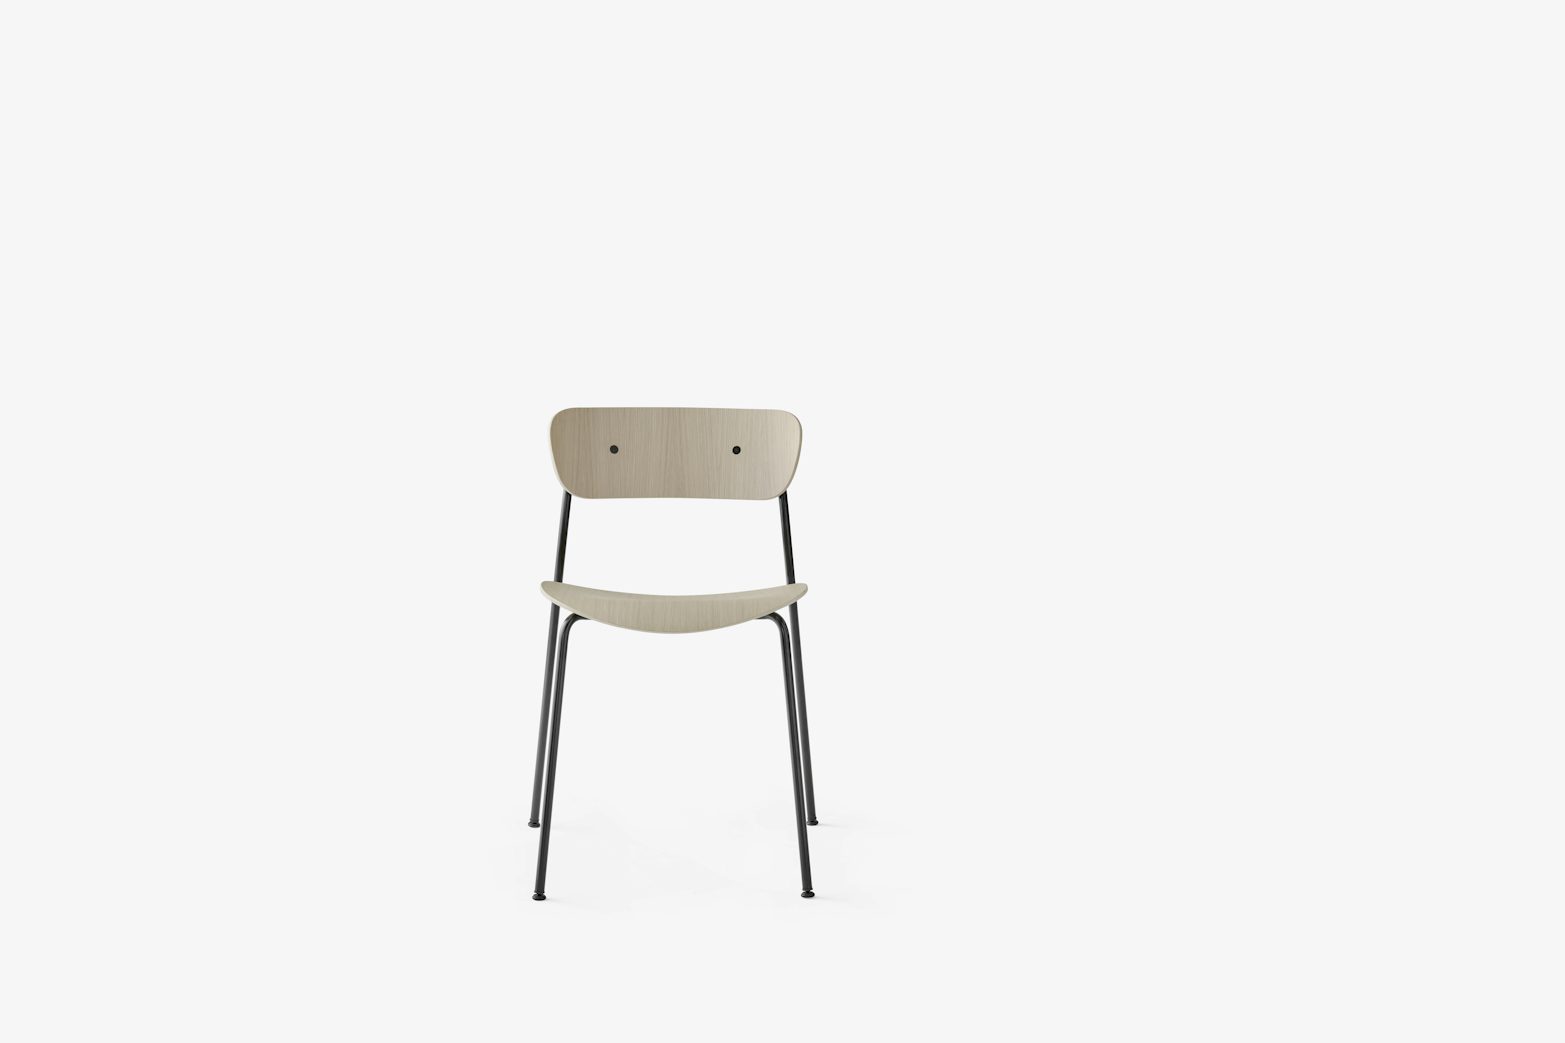 Pavilion chair av1 anderssen and voll andtradition 18